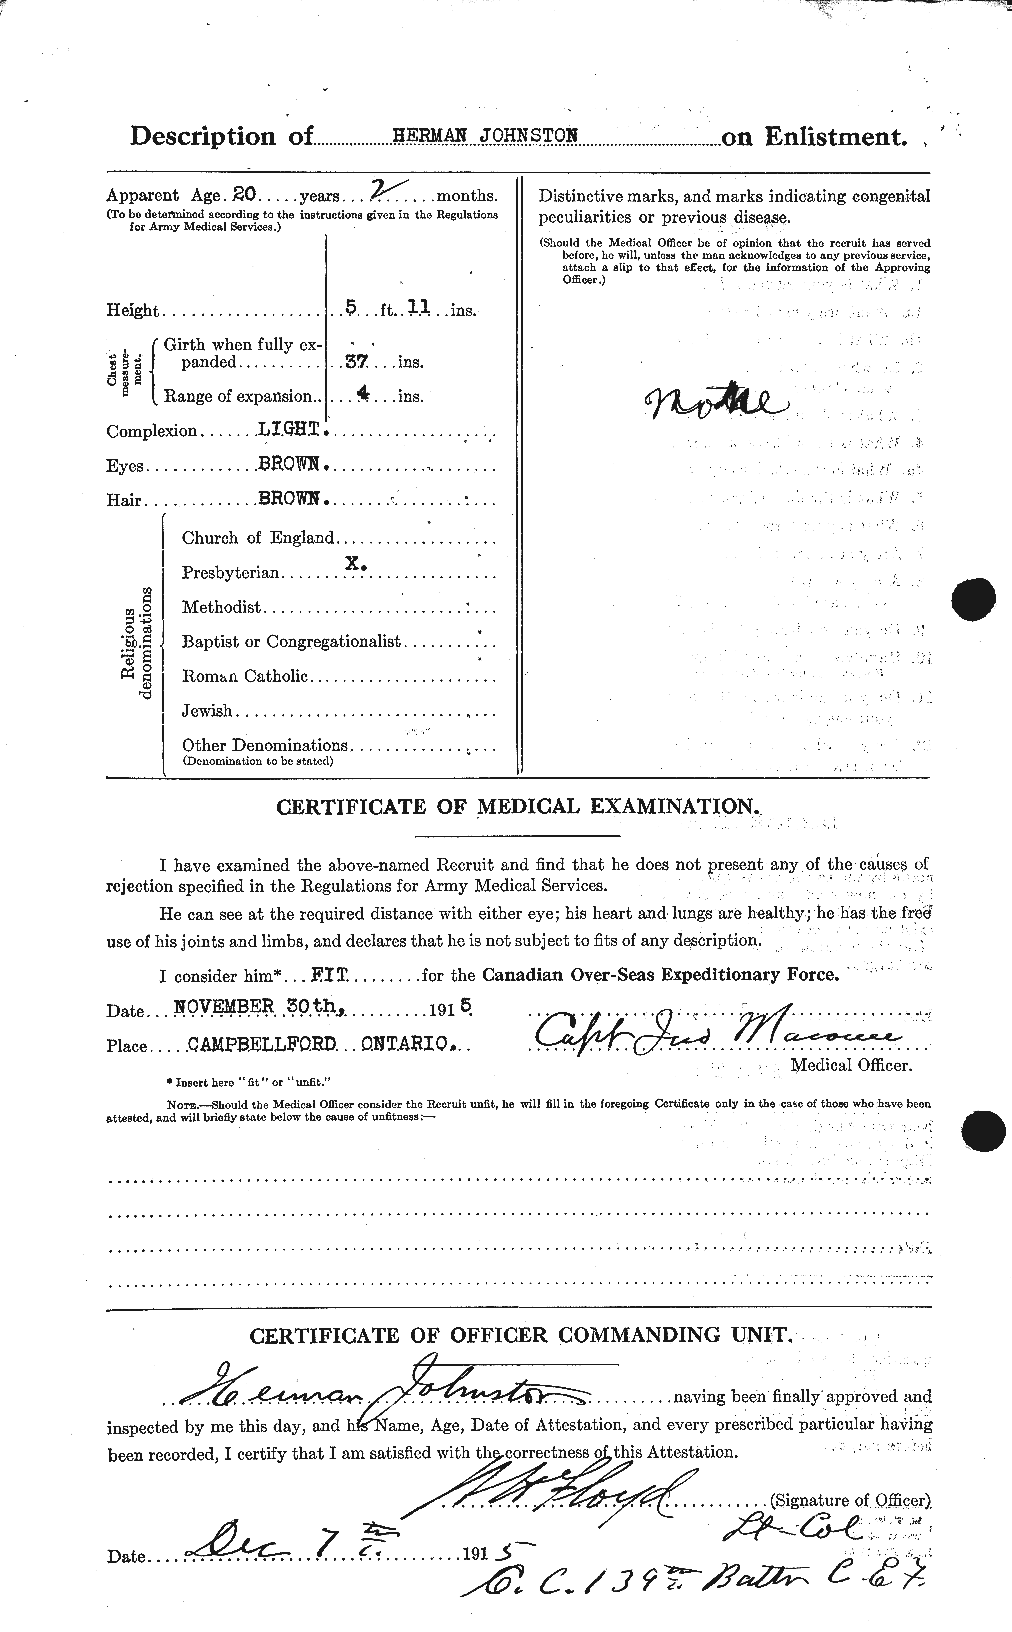 Personnel Records of the First World War - CEF 419563b